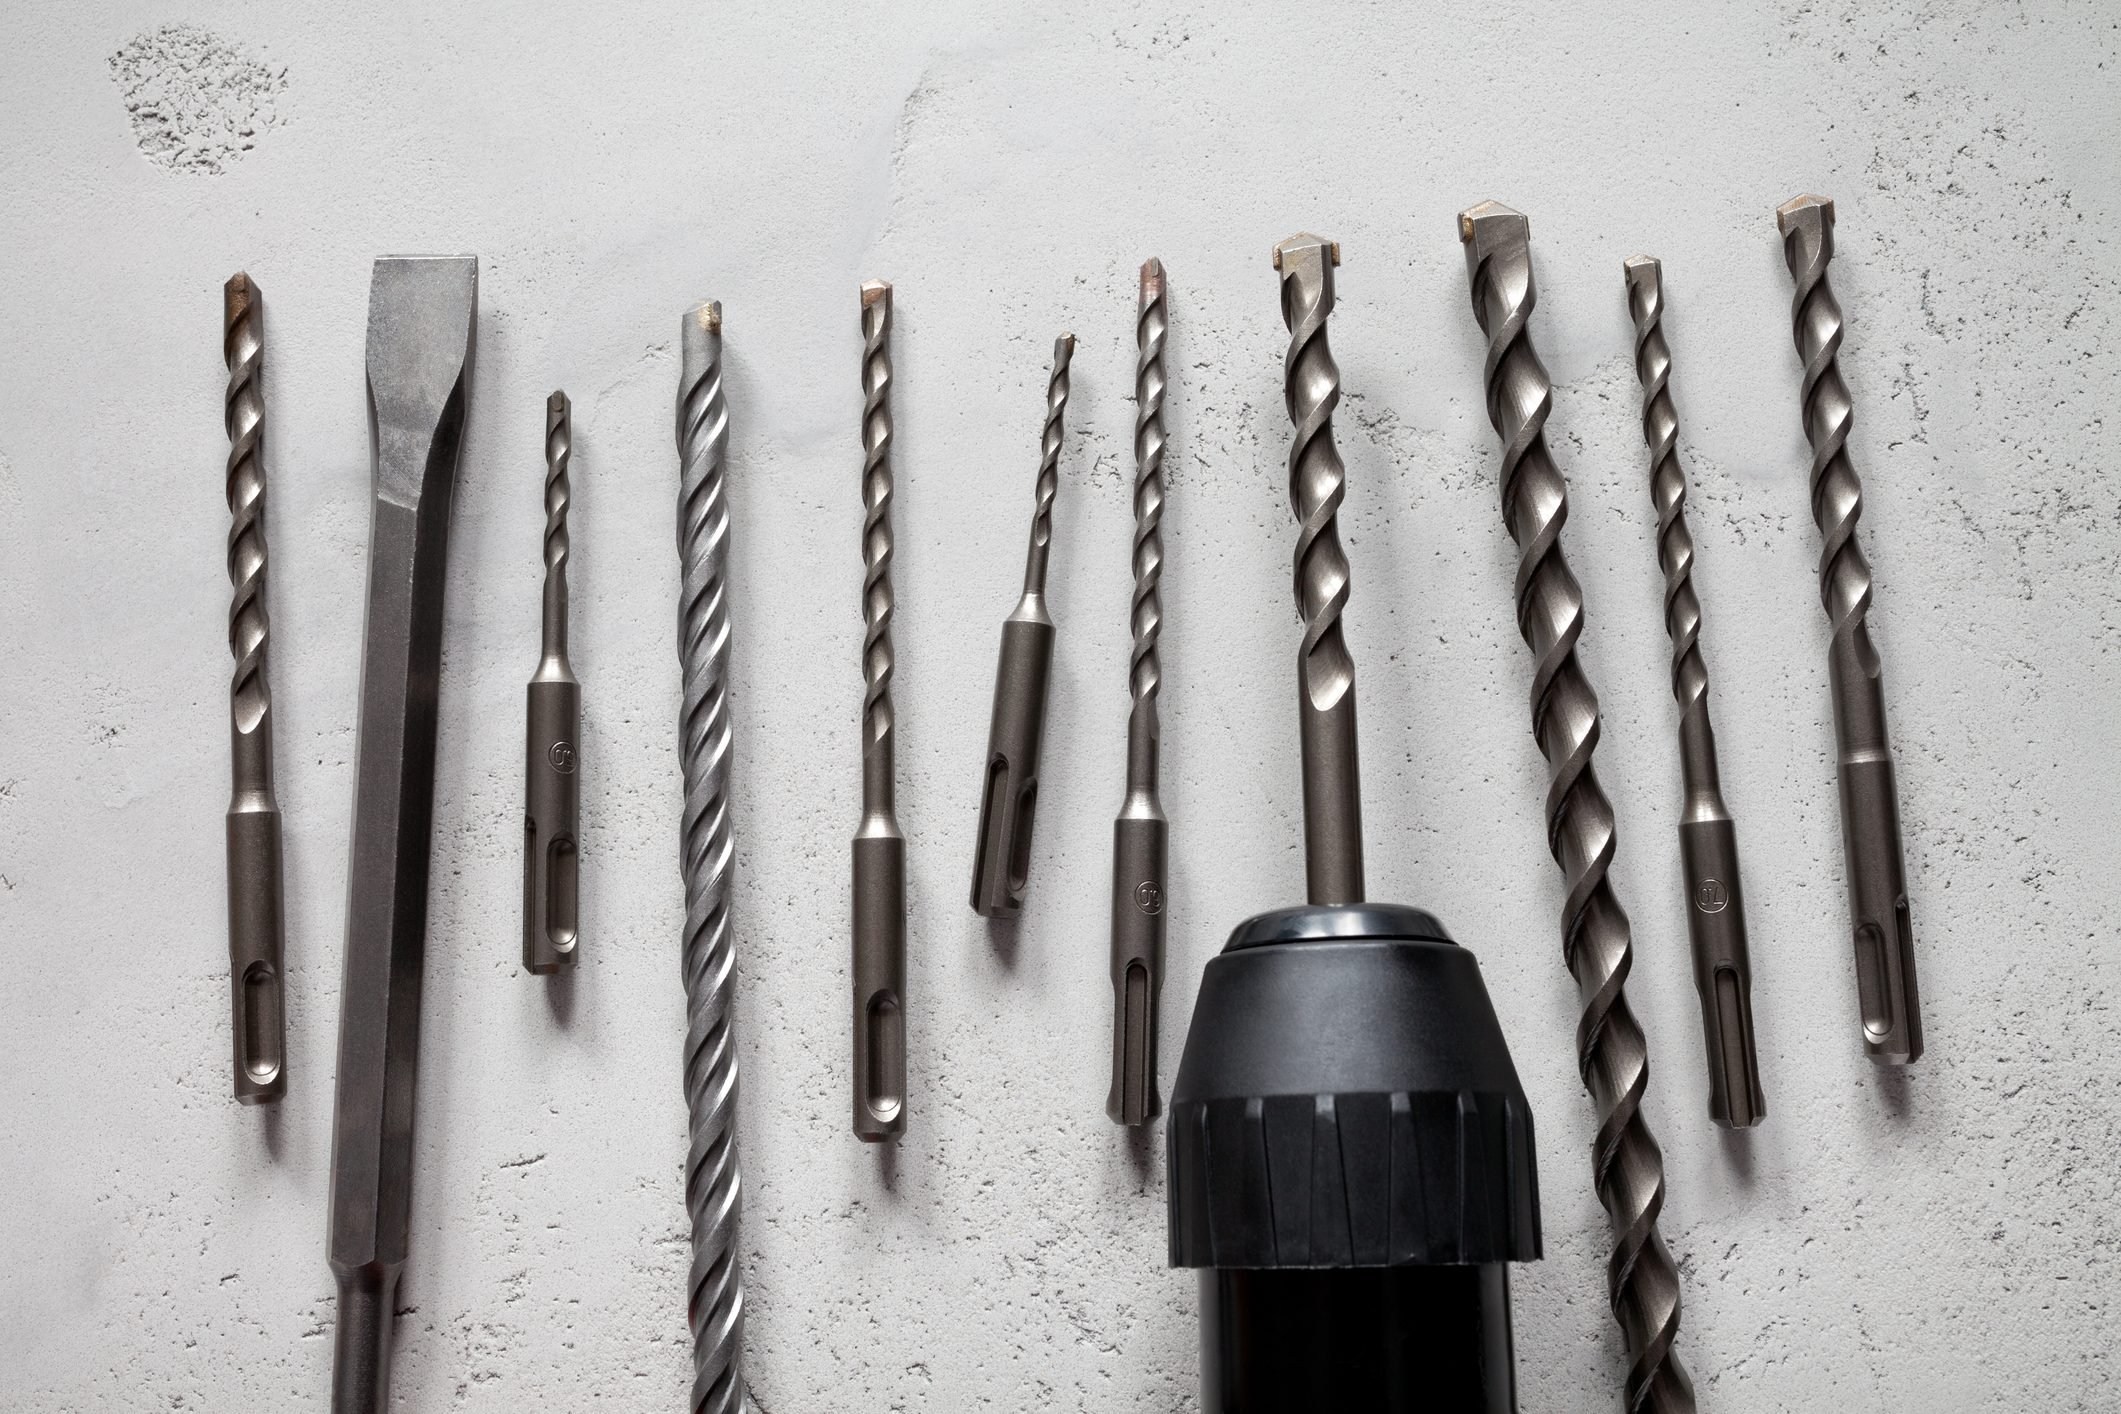 Drill bits: Uses, types and maintenance